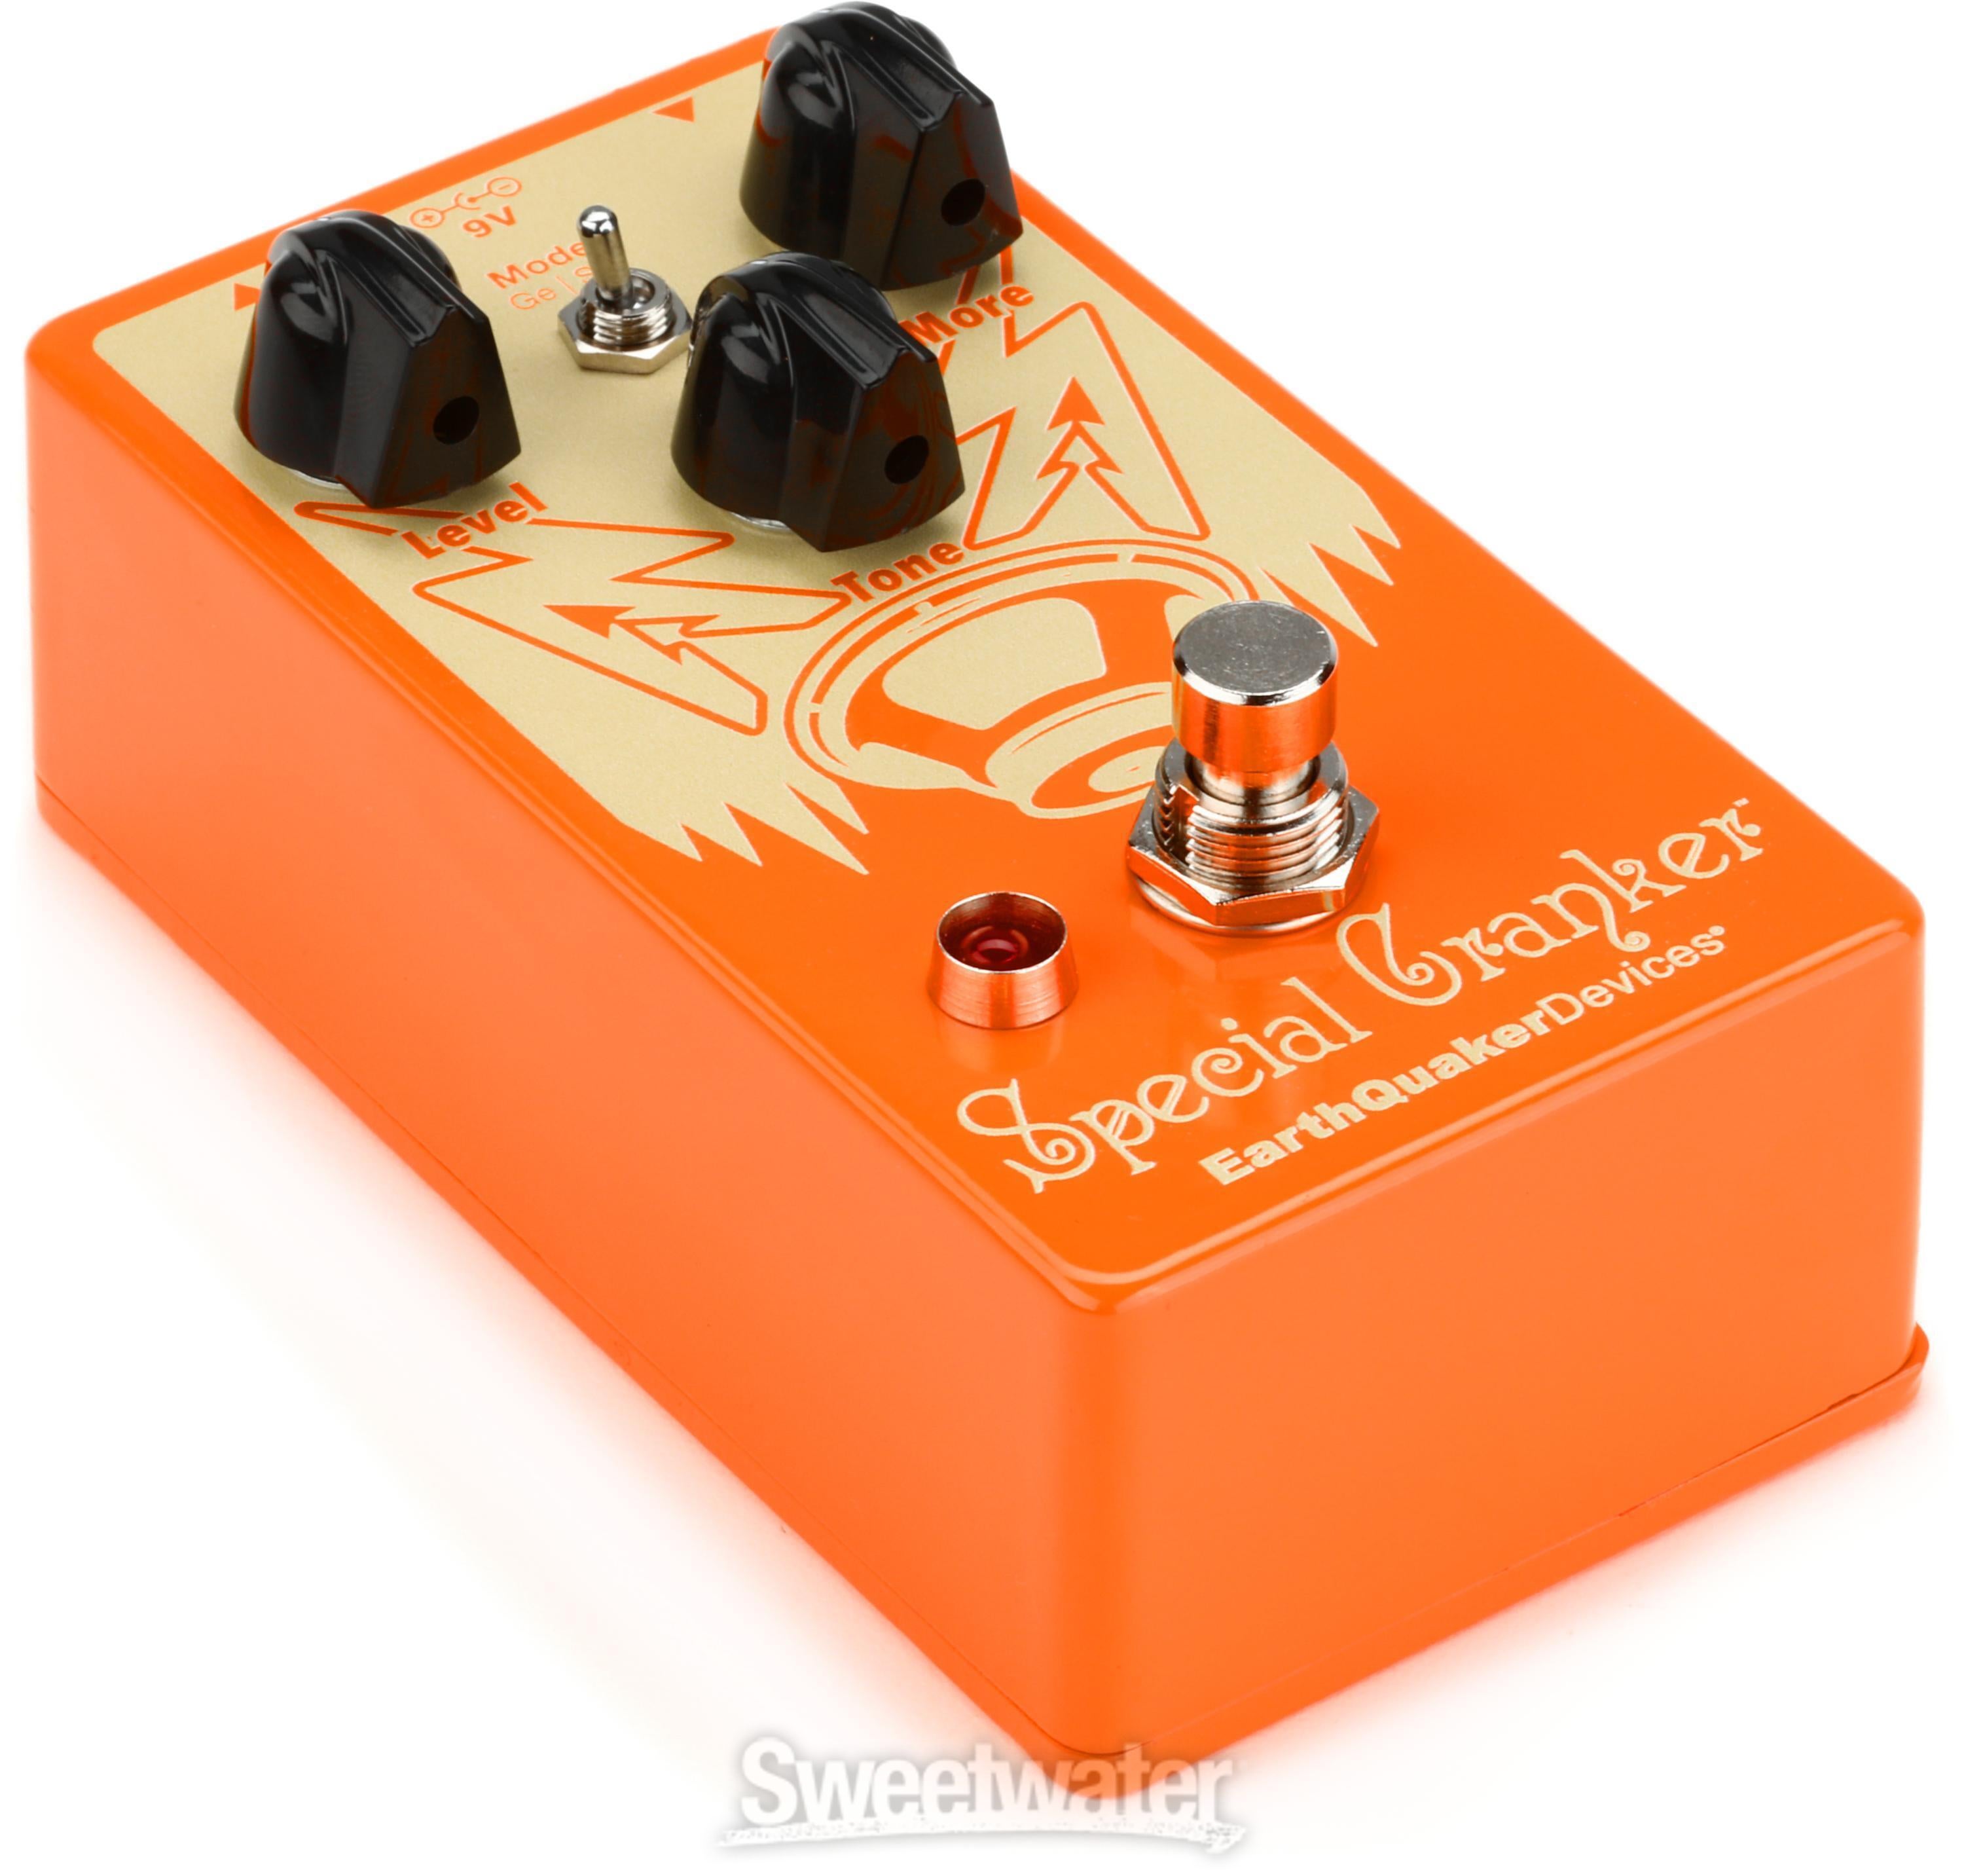 EarthQuaker Devices Special Cranker Overdrive Pedal | Sweetwater